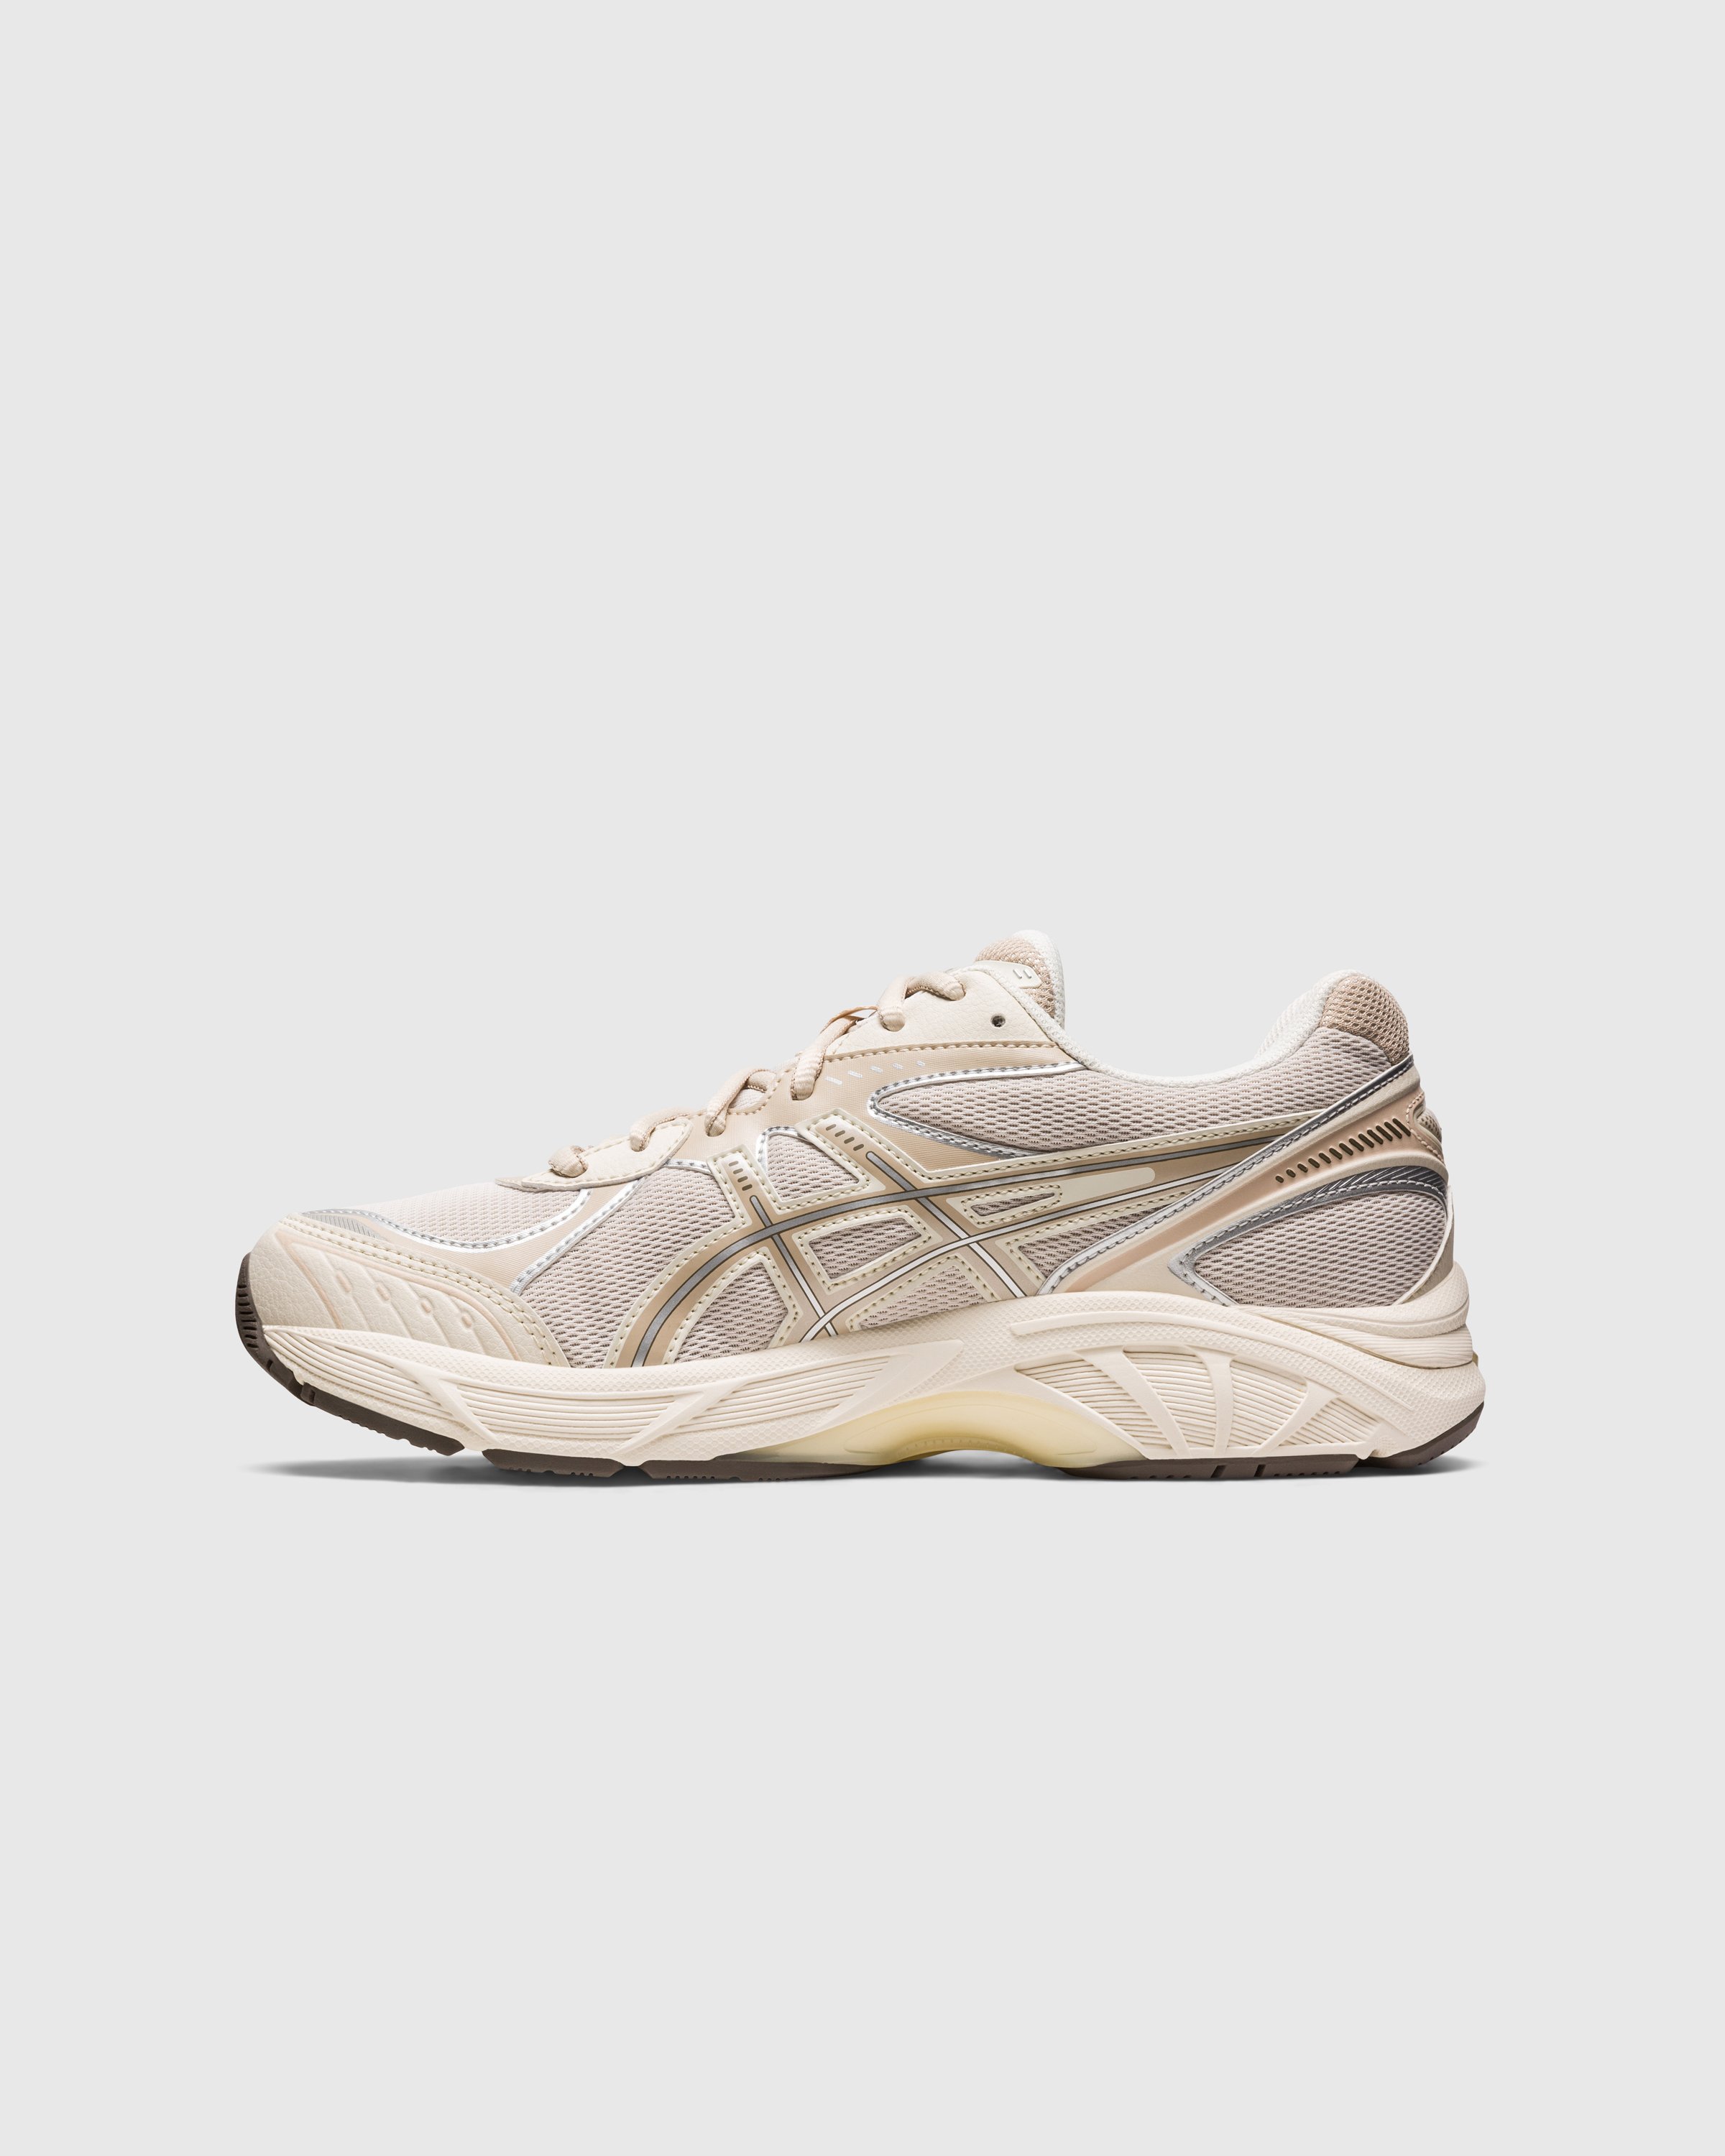 asics - GT-2160 Oatmeal/Simply Taupe - Footwear - Multi - Image 2